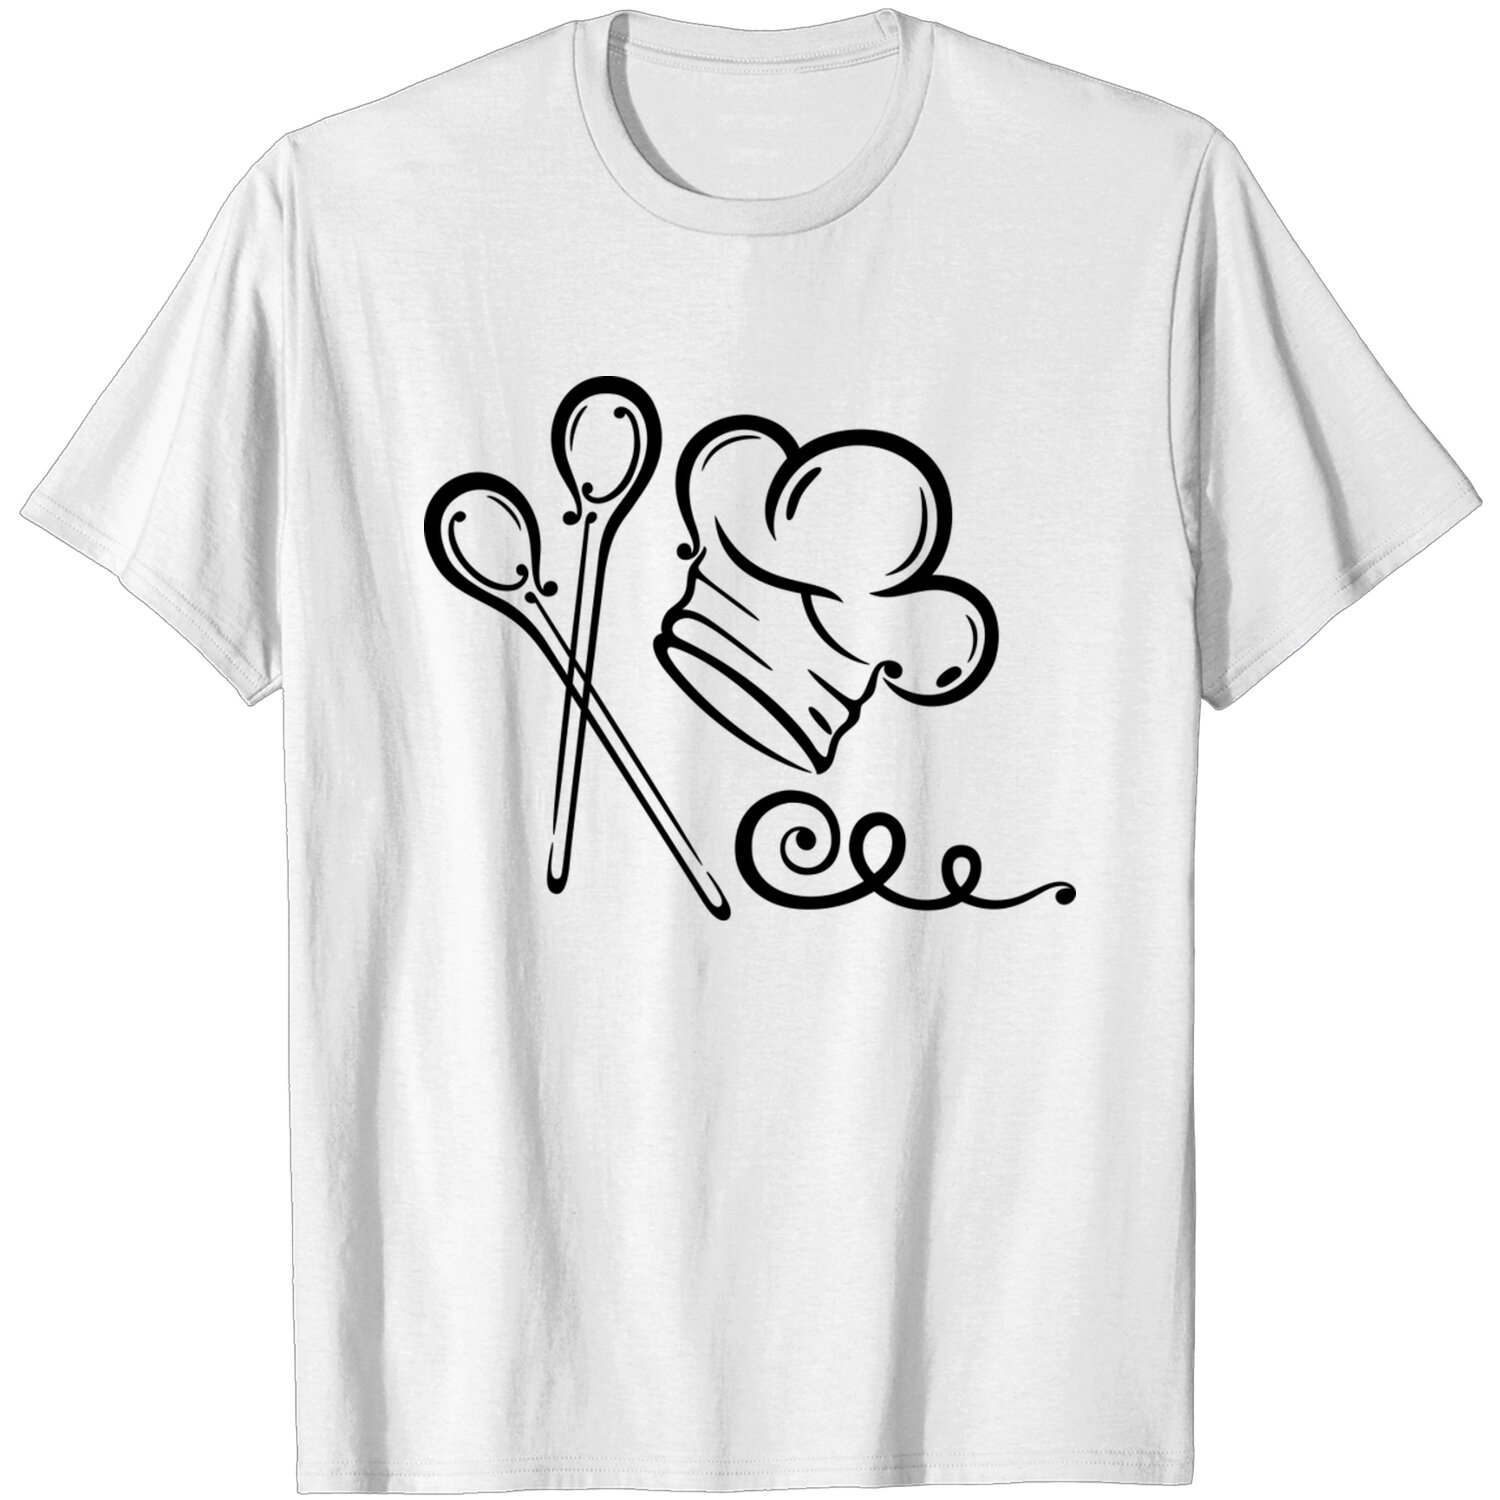 Cooking Hat With Spoons, Kitchen Motif. T Shirt